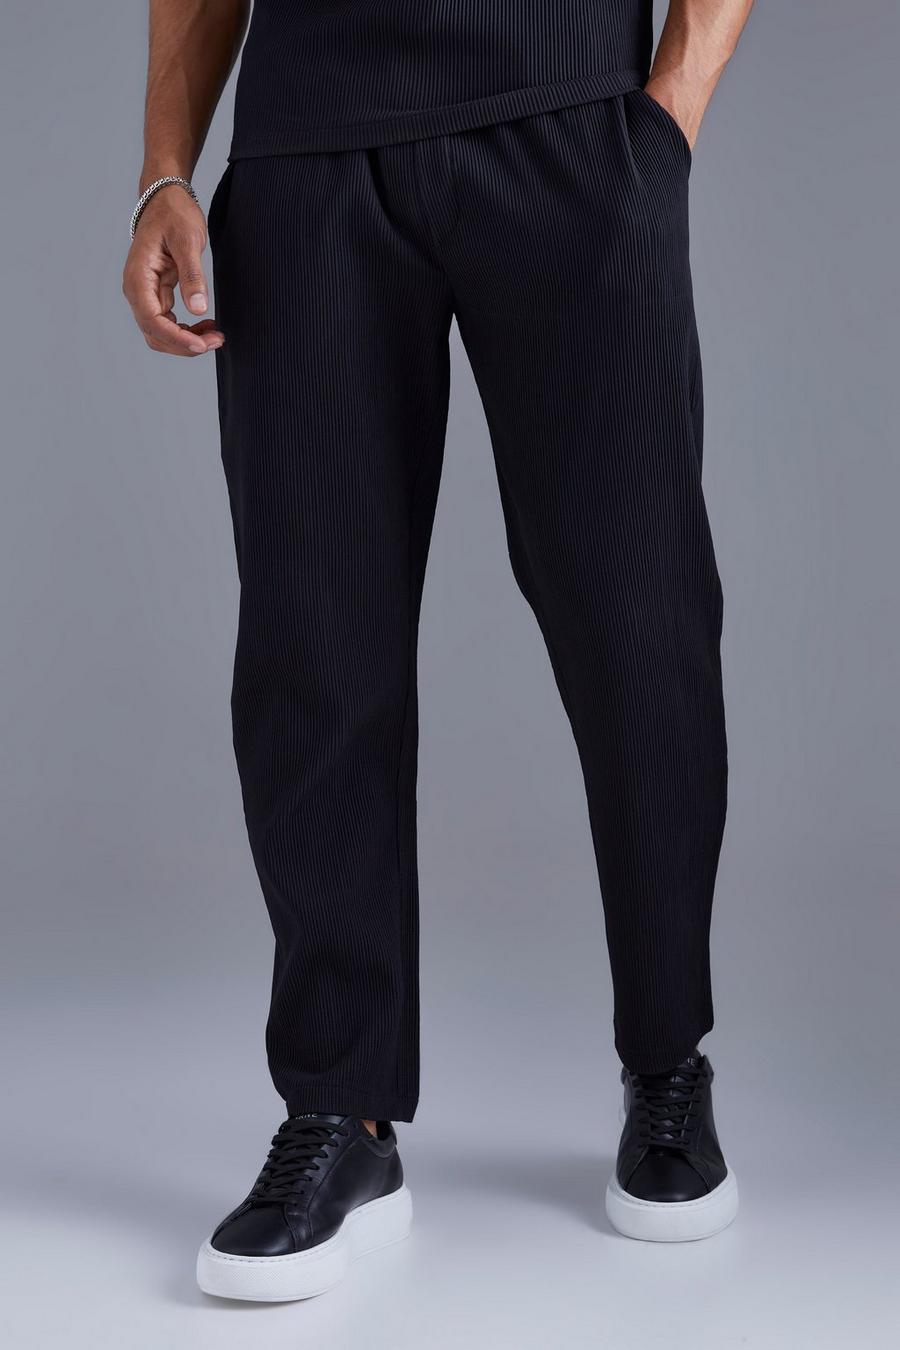 Black Elasticated Waist Tapered Fit Pleated Trouser